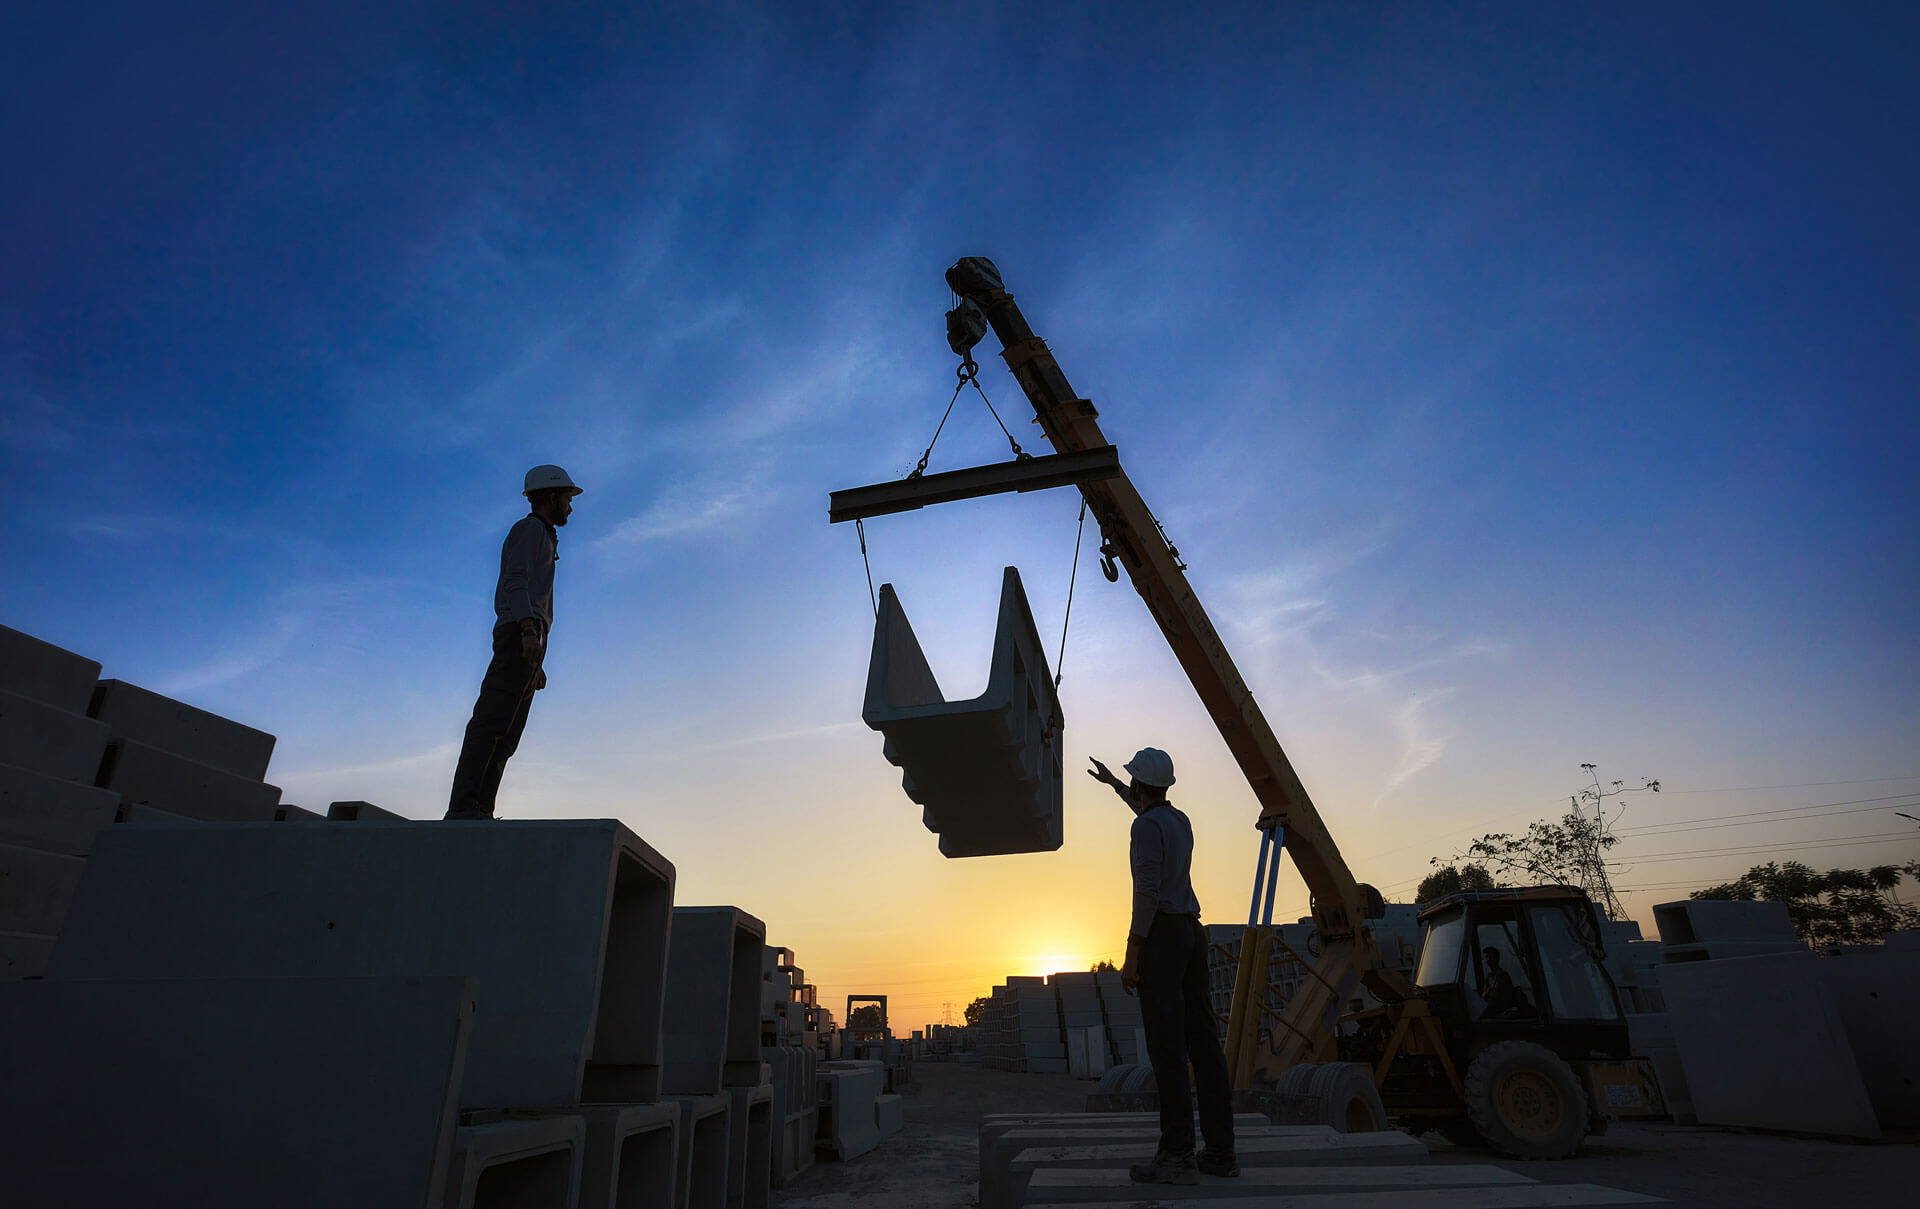 INTRODUCING PRECAST DRAINS AND UTILITY DUCTS